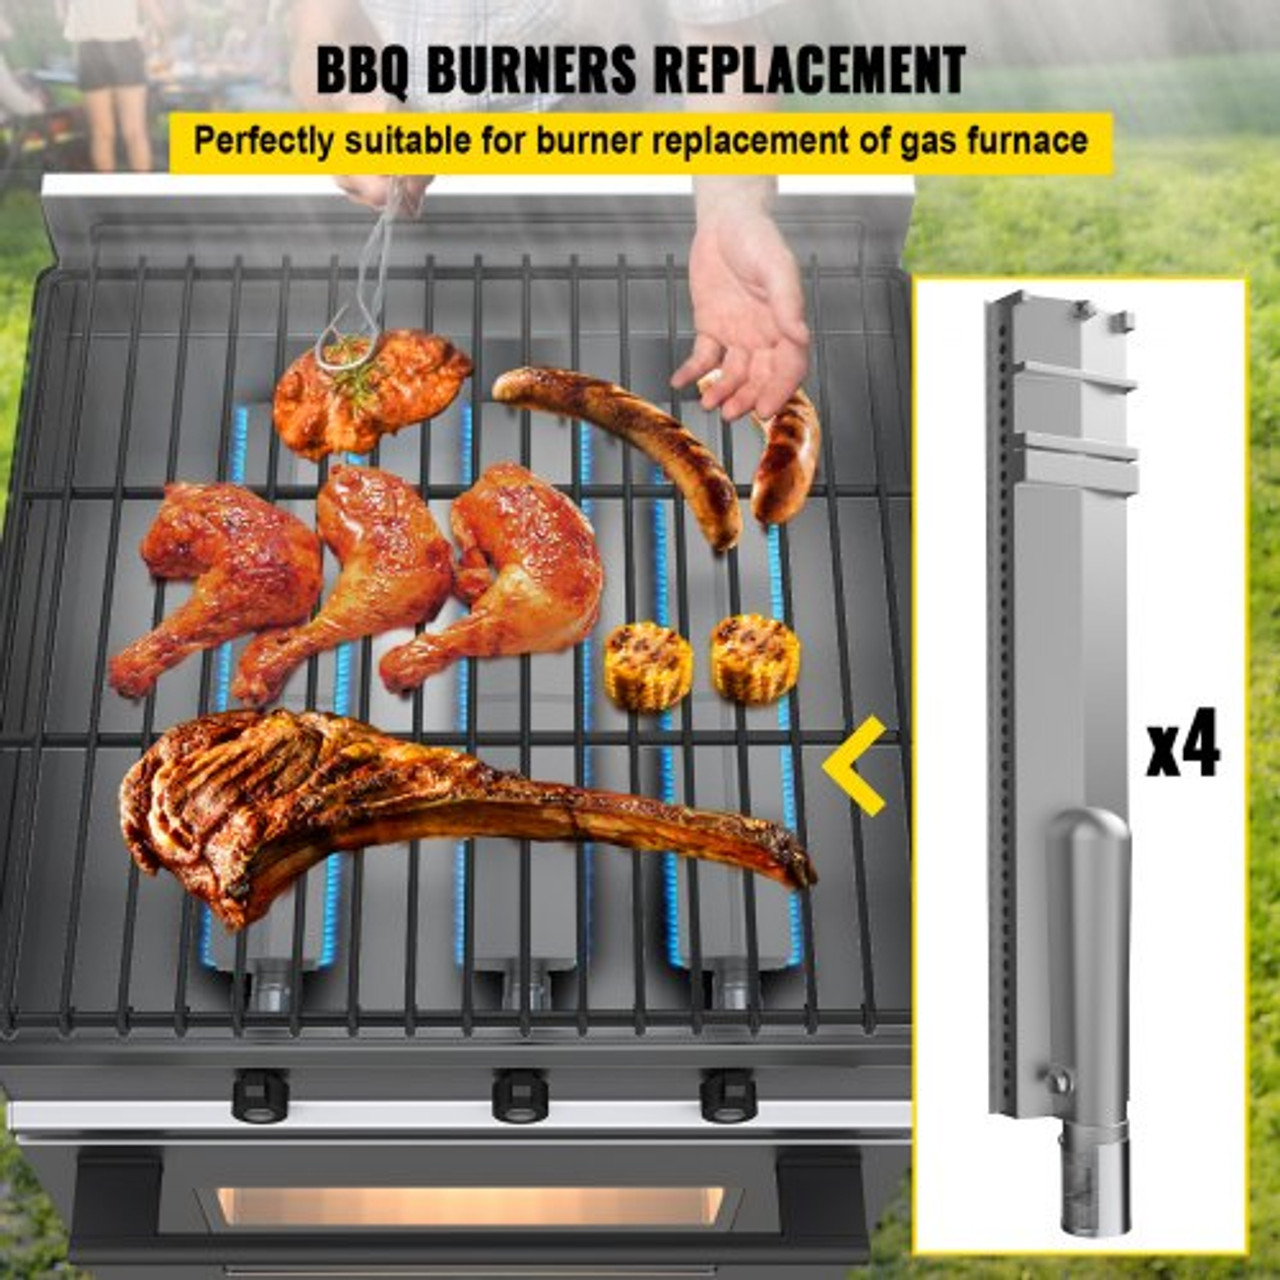 Grill Burners, Stainless Steel BBQ Burners Replacement, 4 Packs Grill Burner Replacement, Flame Grill with 16.1" Length Barbecue Replacement Parts with Evenly Burning for Premium Gas Grills